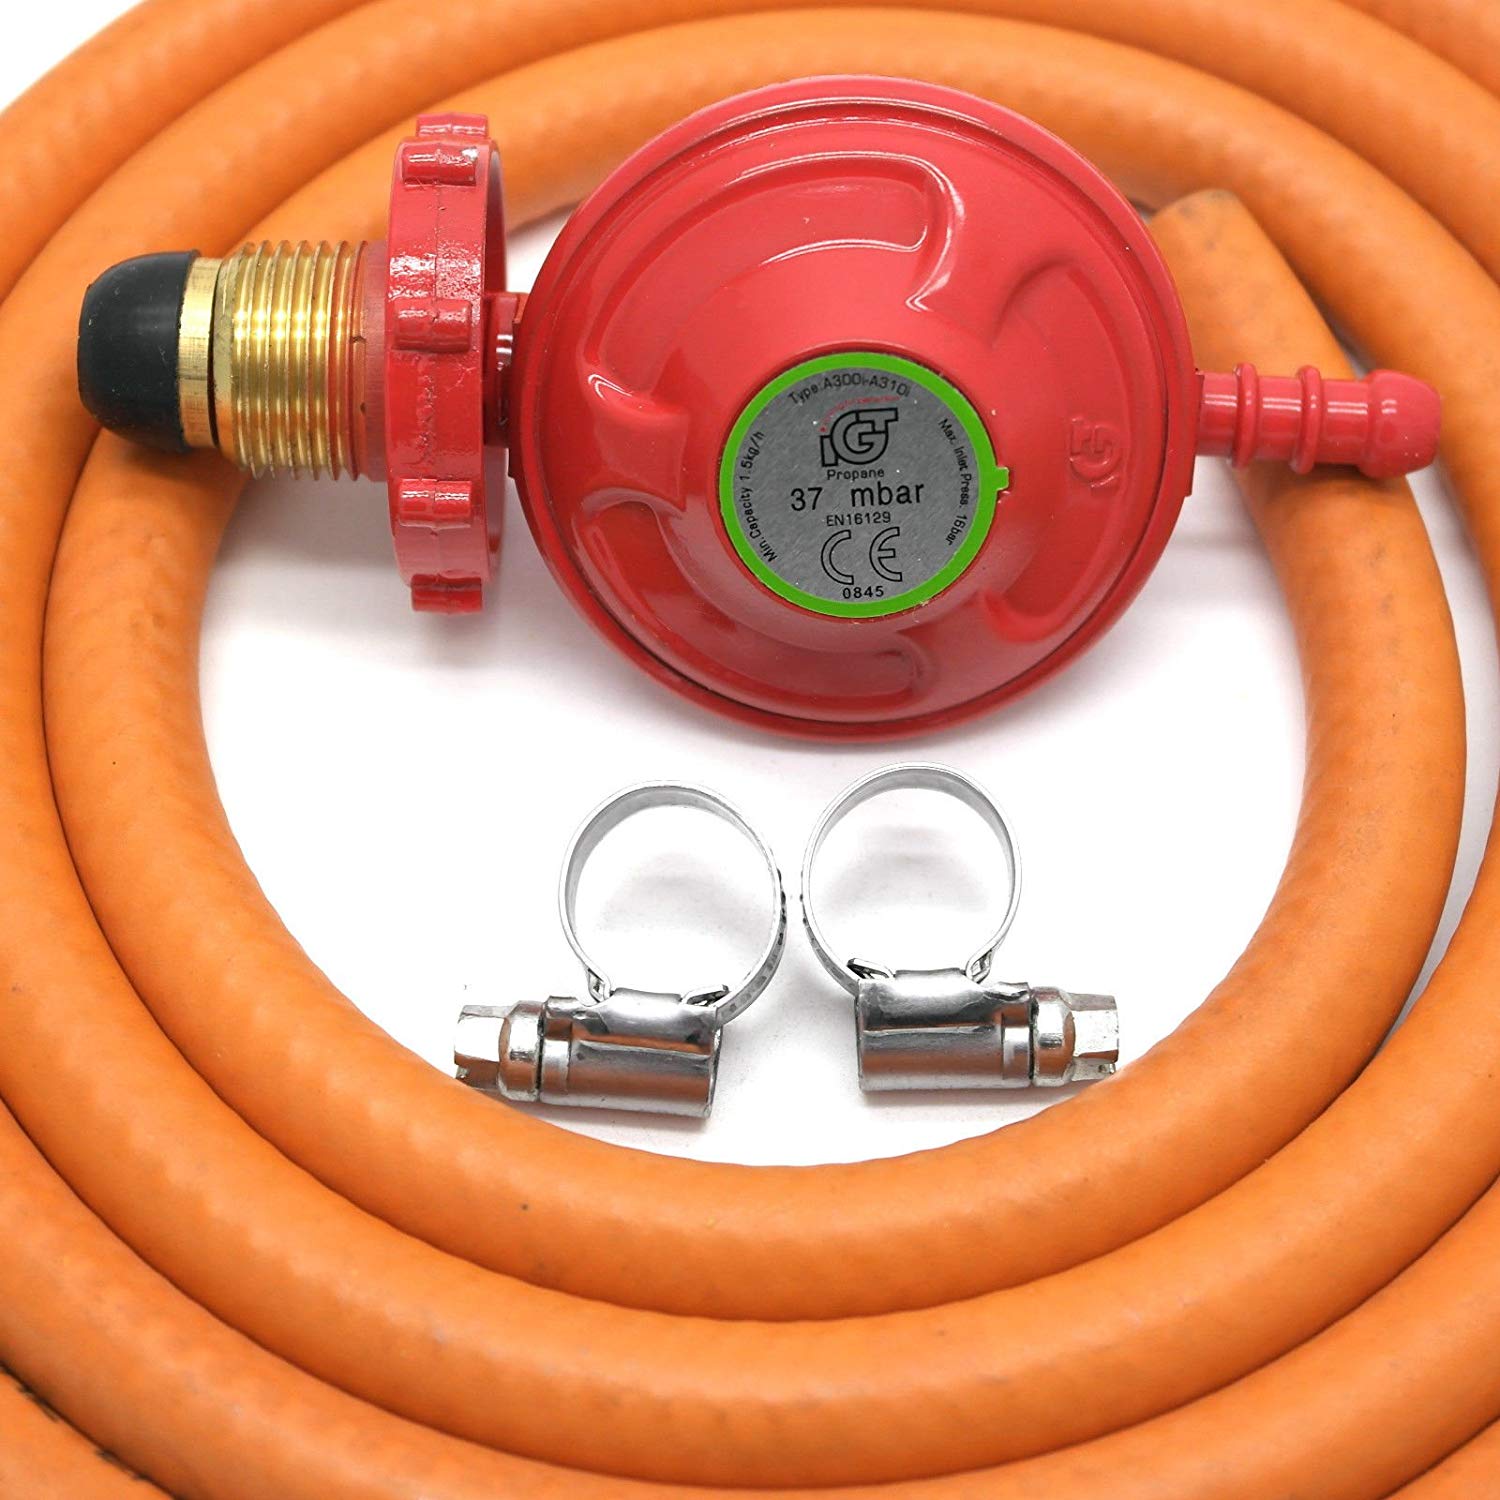 37mb Propane Gas Regulator With Pressure Gauge & 2 M Hose Kit With 2 Clips 37mbar POL